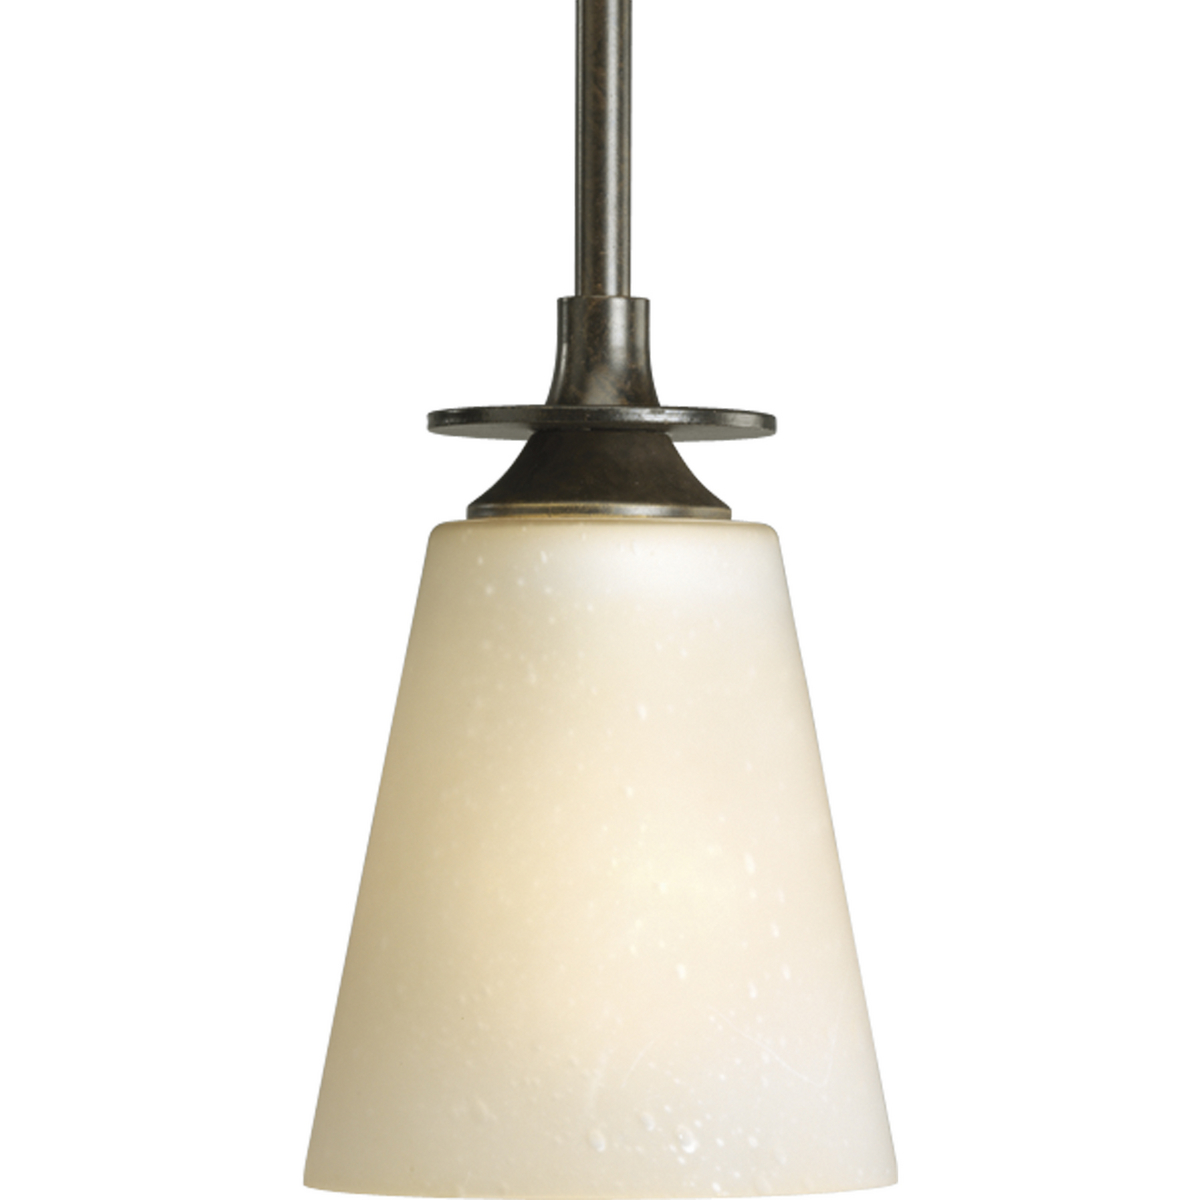 One-light mini-pendant with seeded topaz glass. The Cantata Collection is a sophisticated and modern style with a sense of traditional craftsmanship.